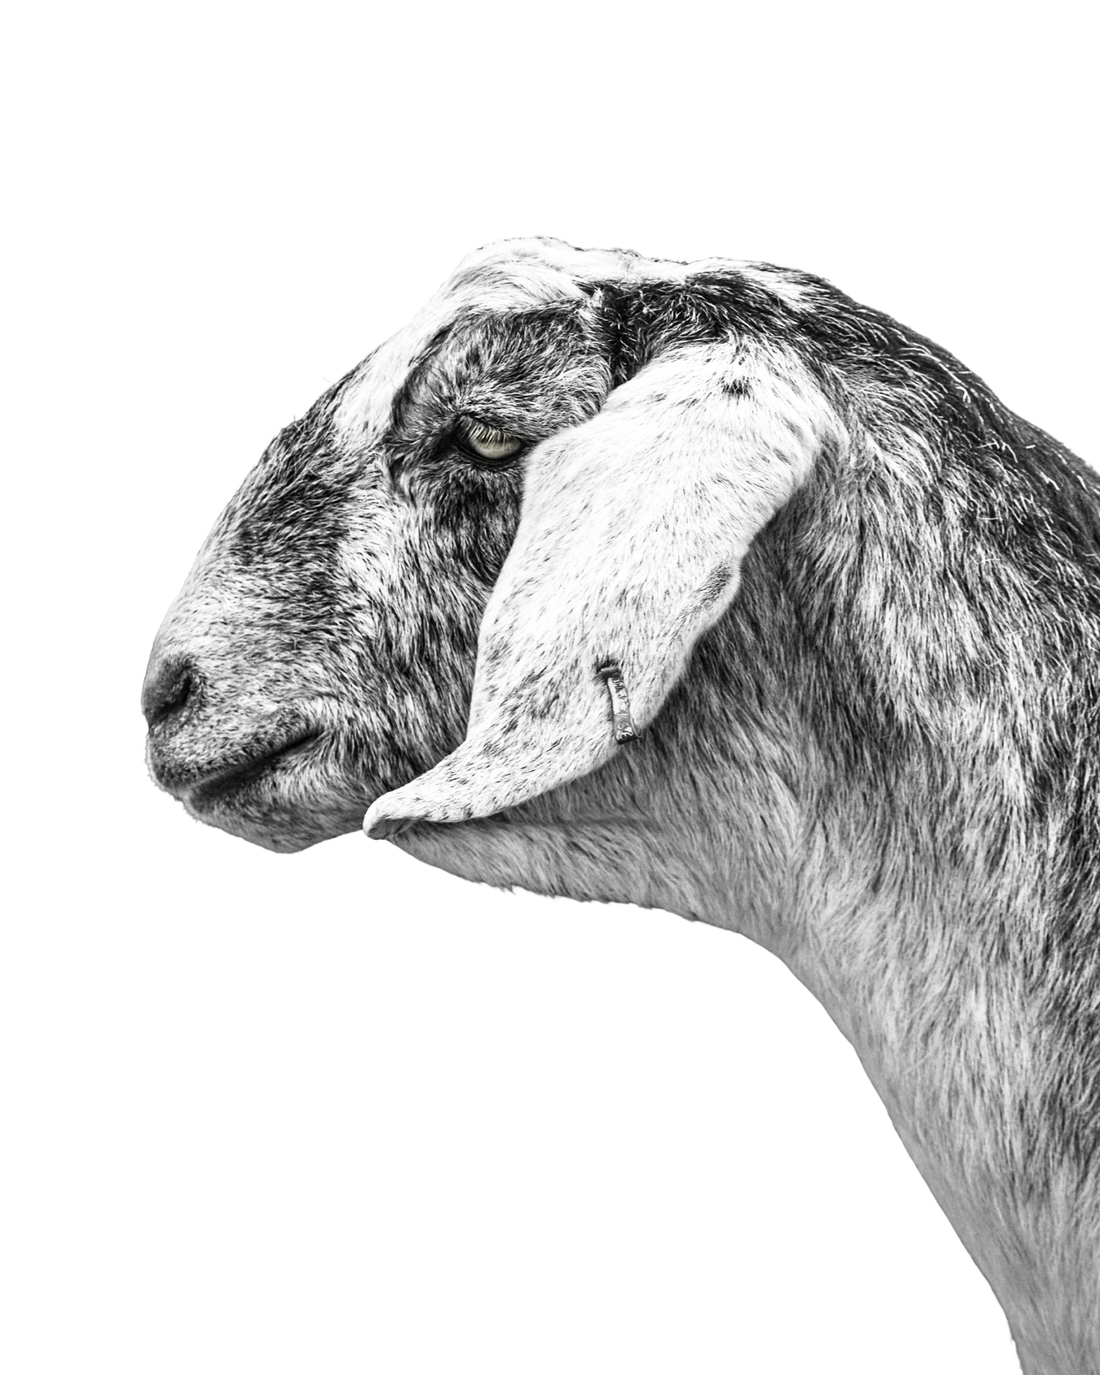 A black and white photograph of a grey goat. Ethan Oberst Photography